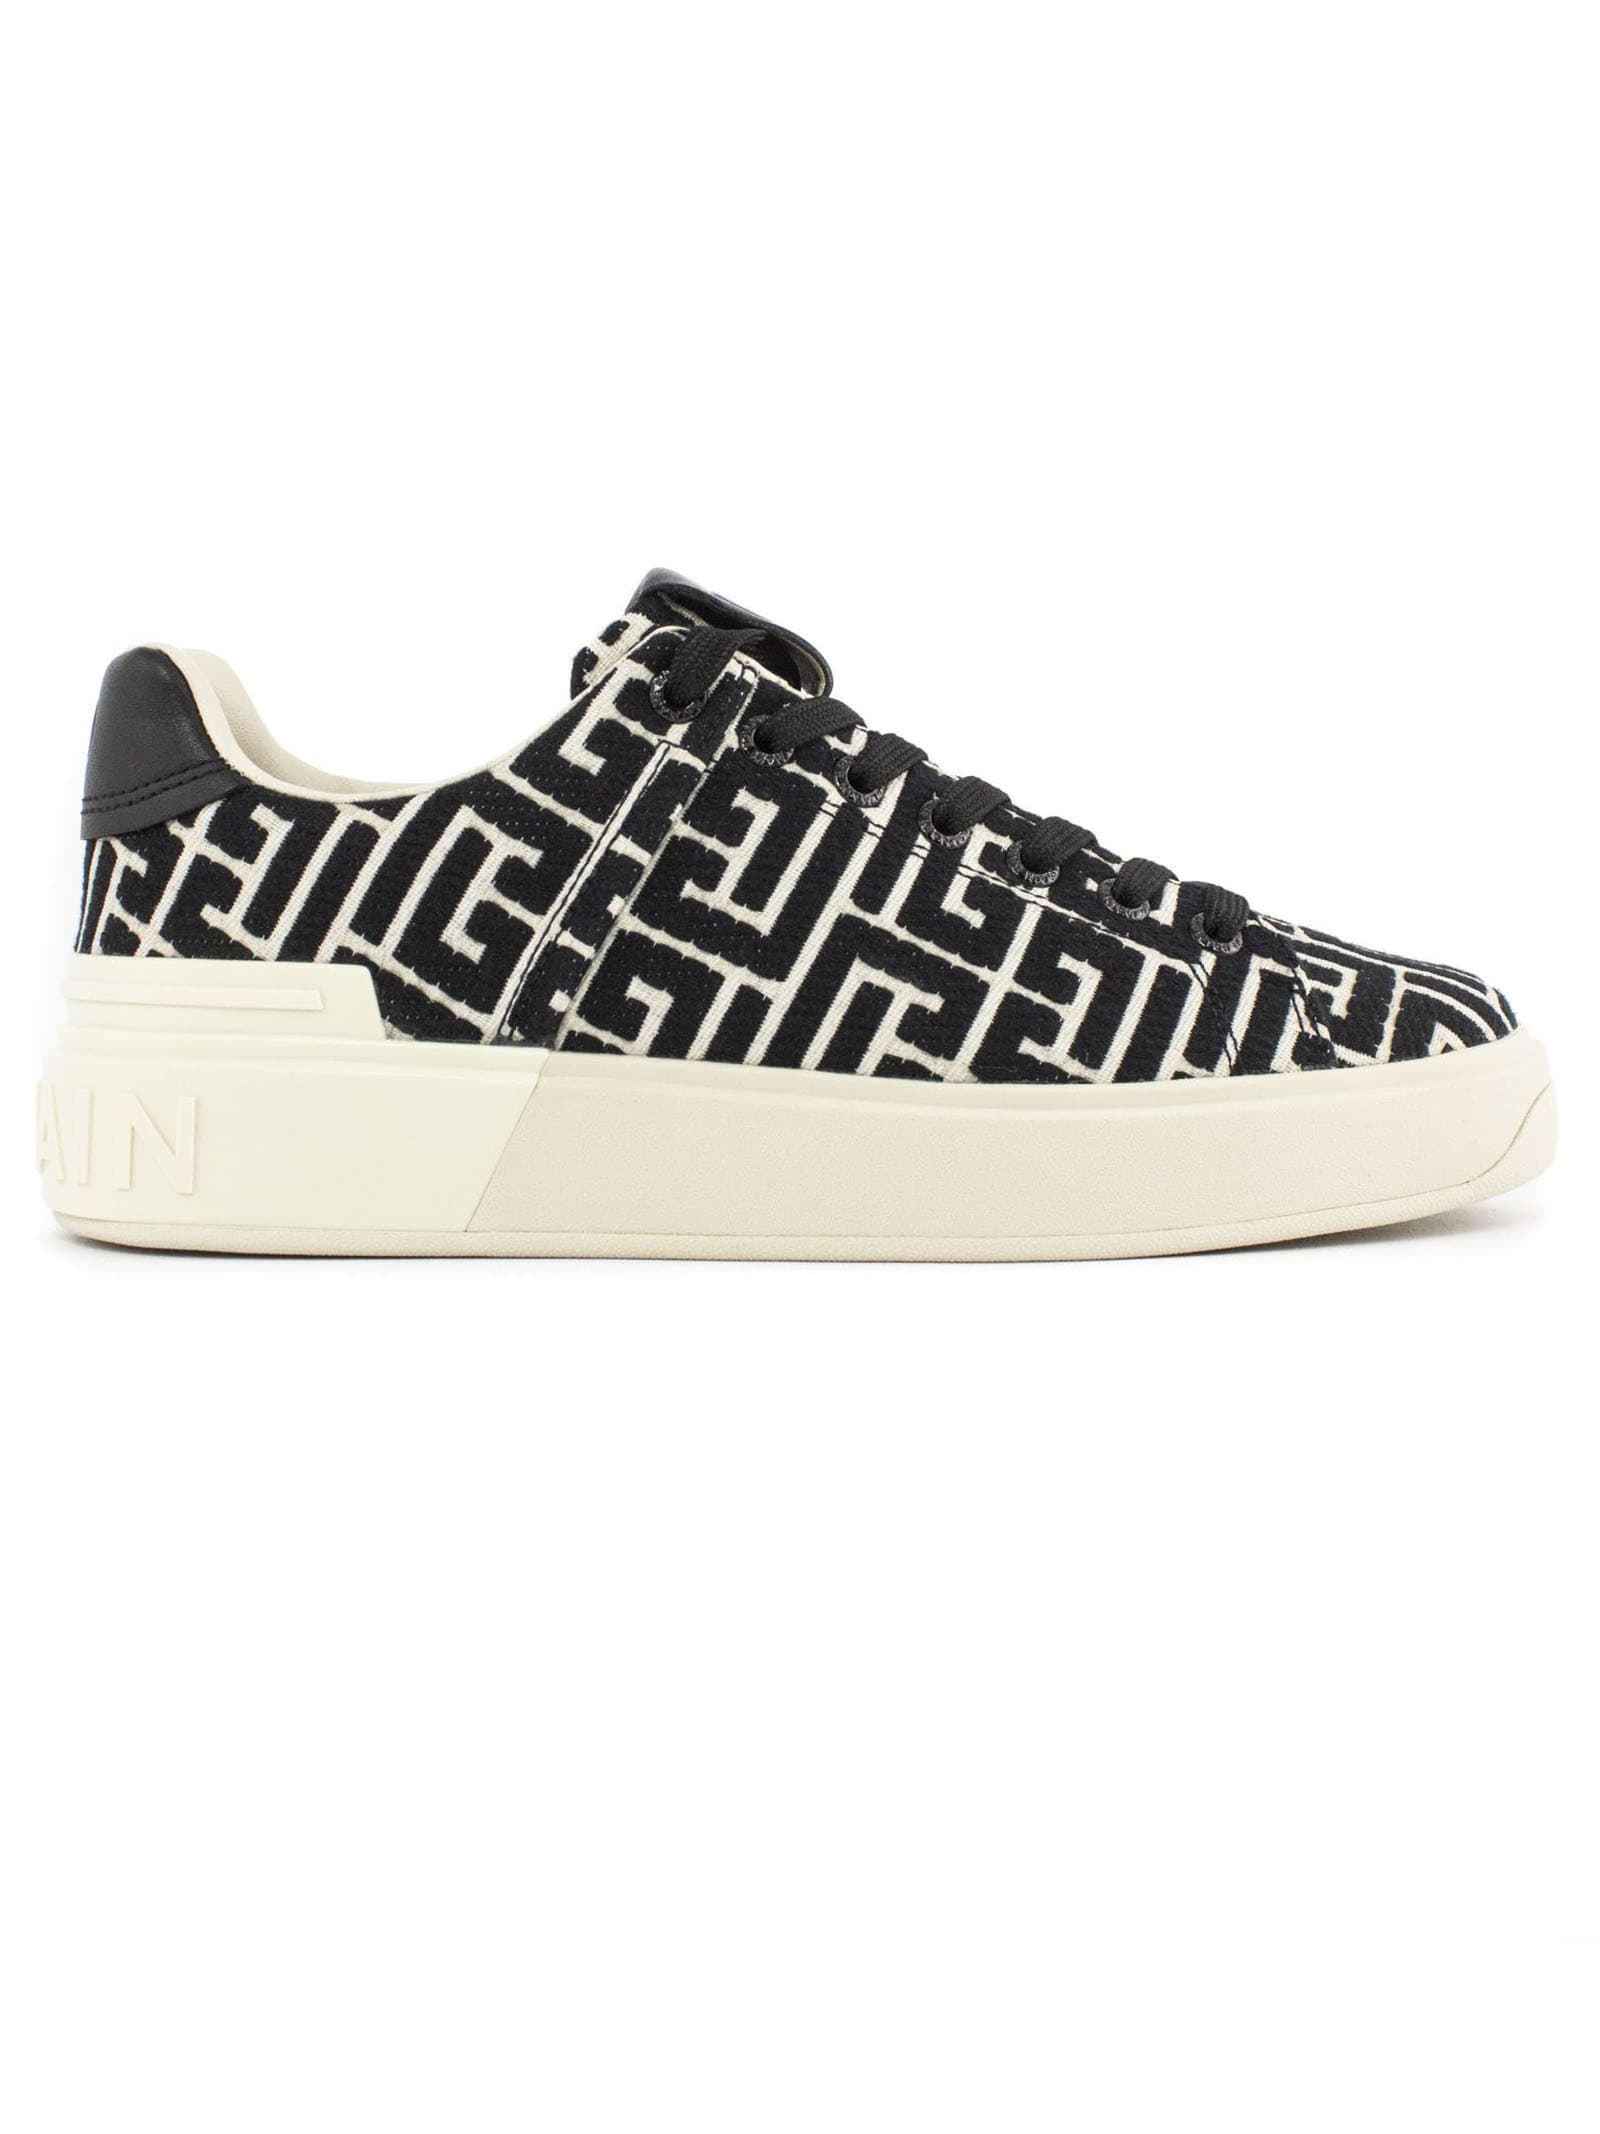 Buy Balmain Ivory And Black Jacquard Sneakers online, shop Balmain shoes with free shipping